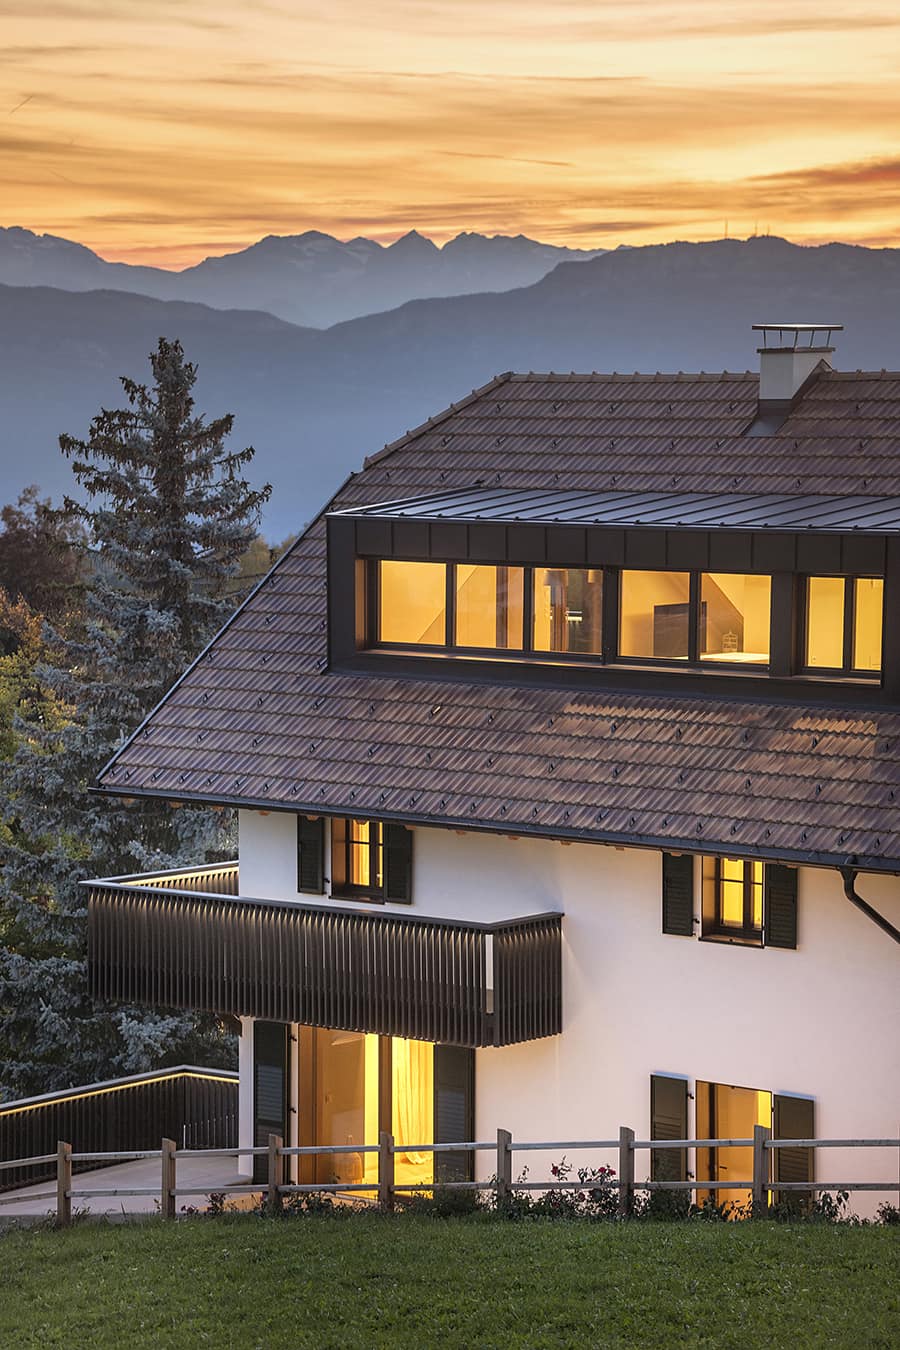 Villa Renovation: Inside and Beyond the South Tyrolean Traditions